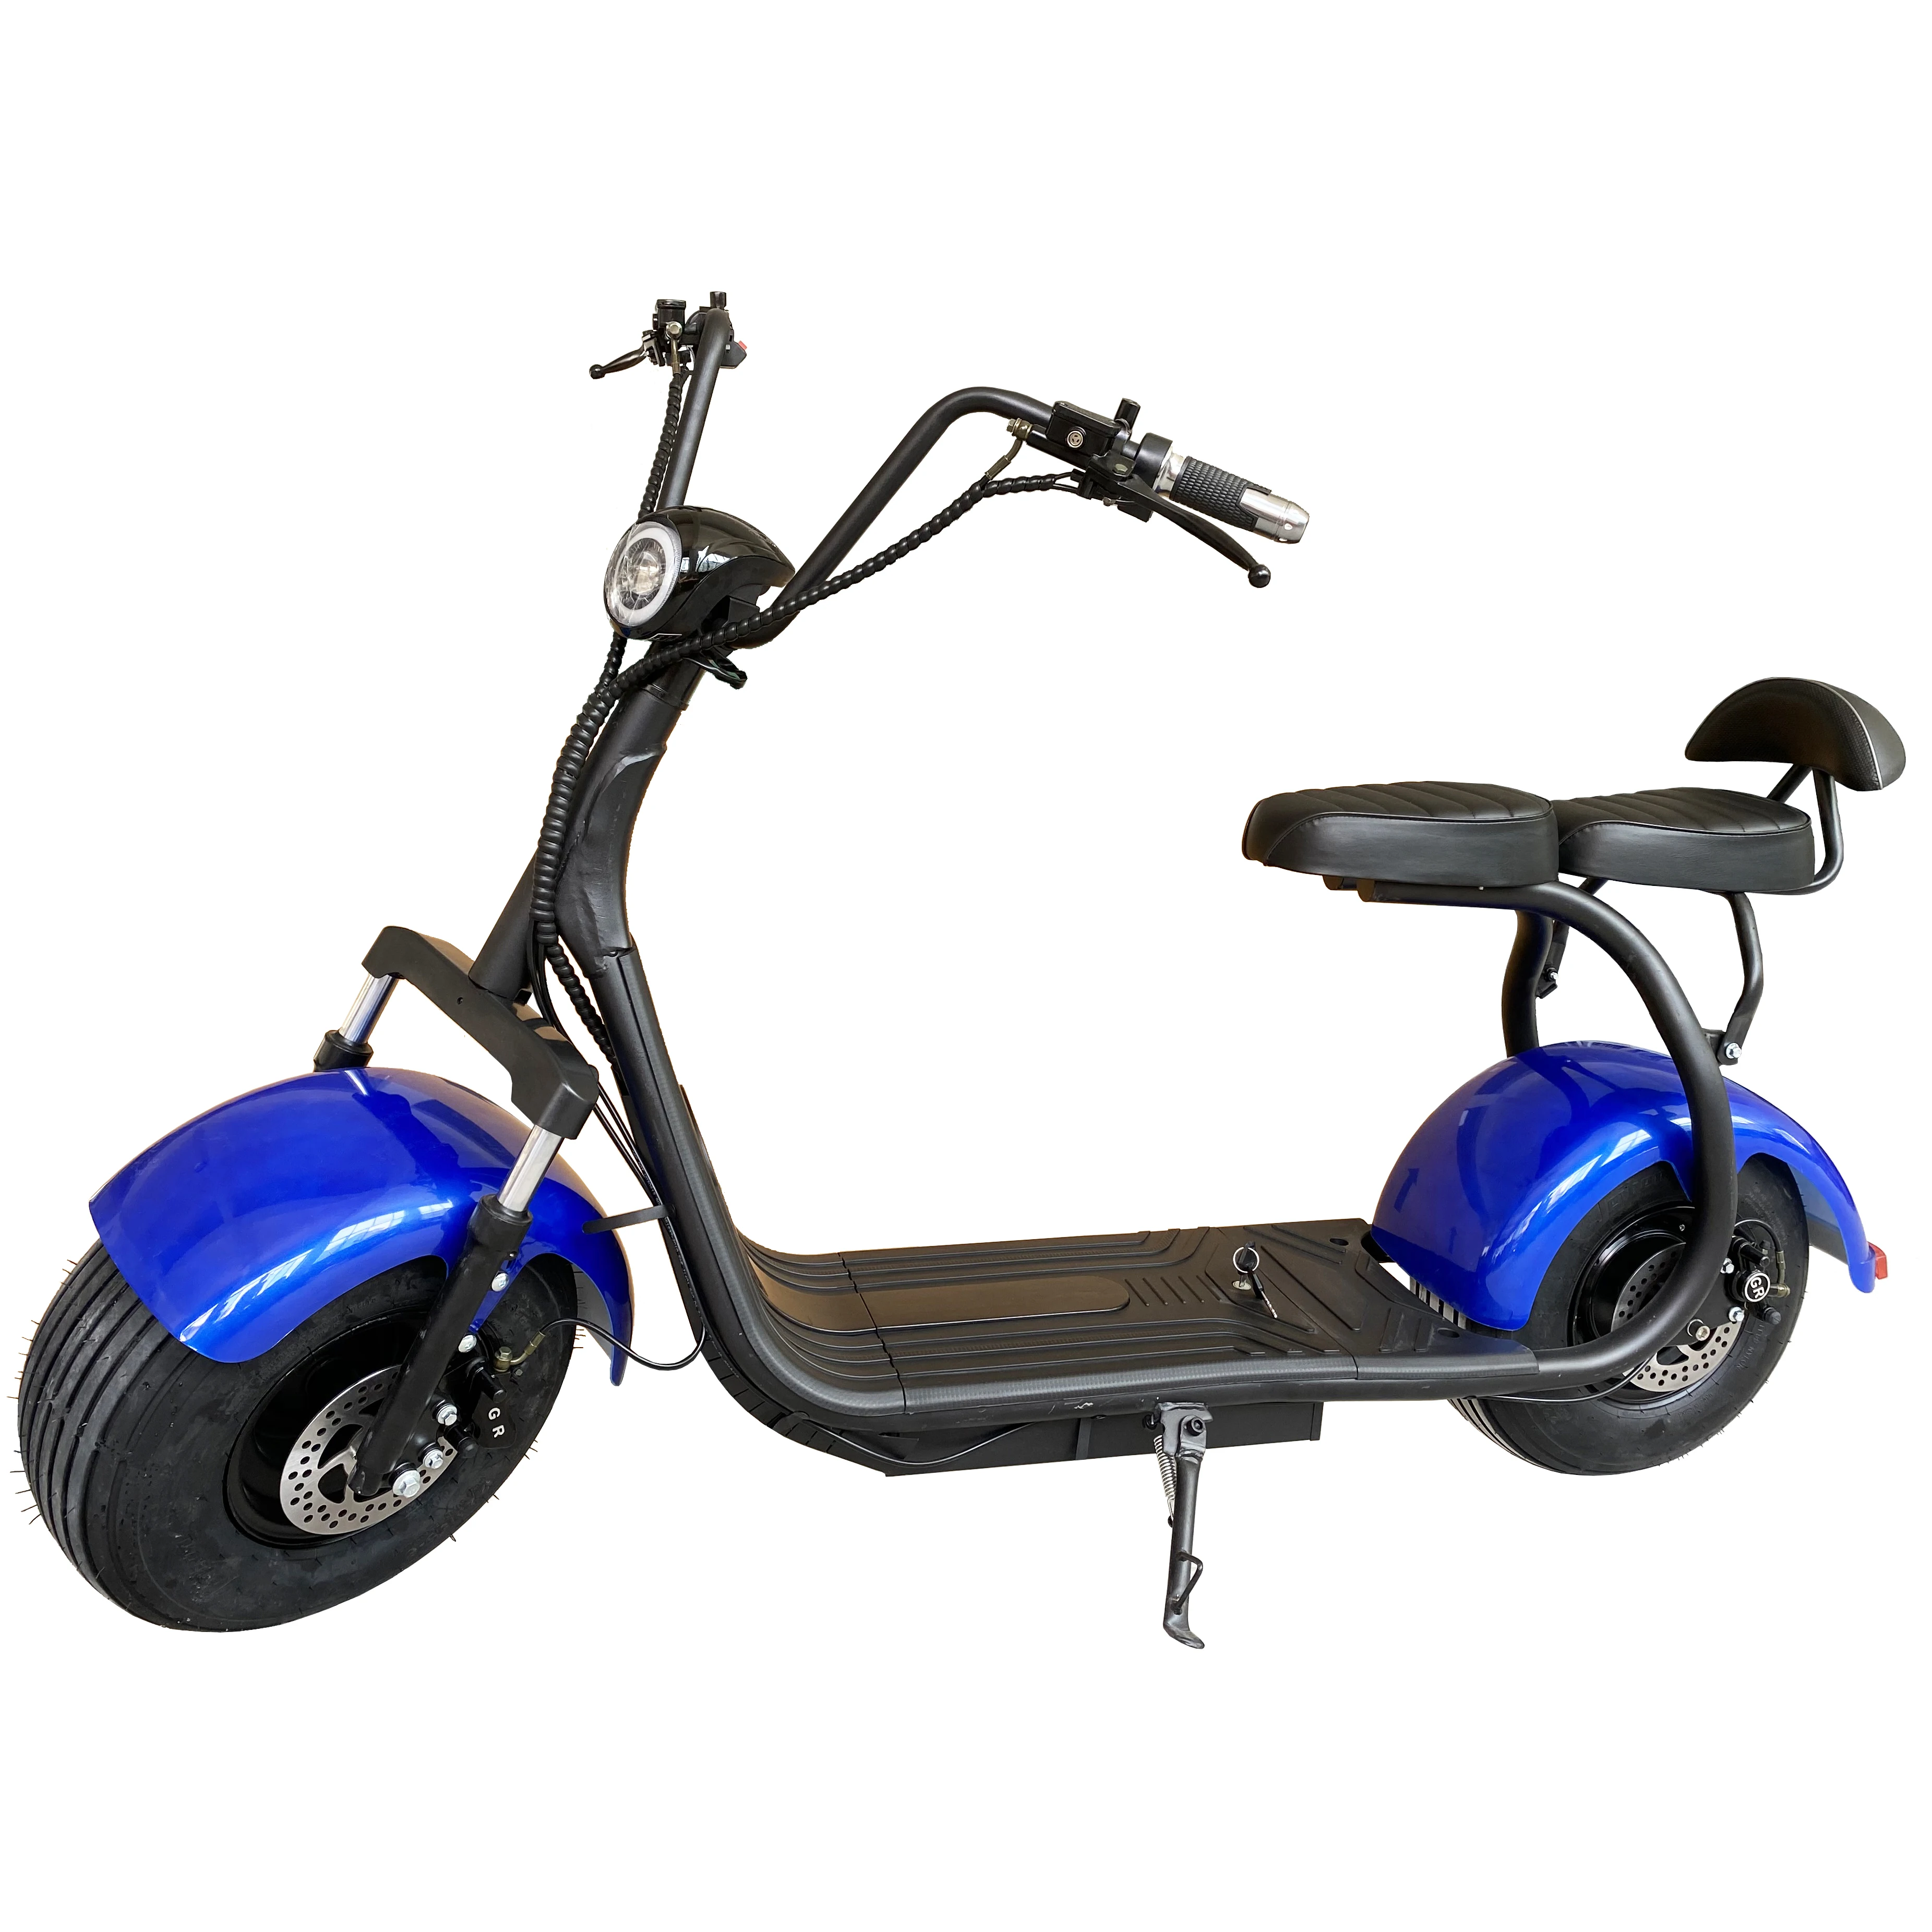 

2019 Hot sale 18*9.5 wide wheel EEC COC electric scooter 2000w motor 45-60km range with double seat harl citycoco